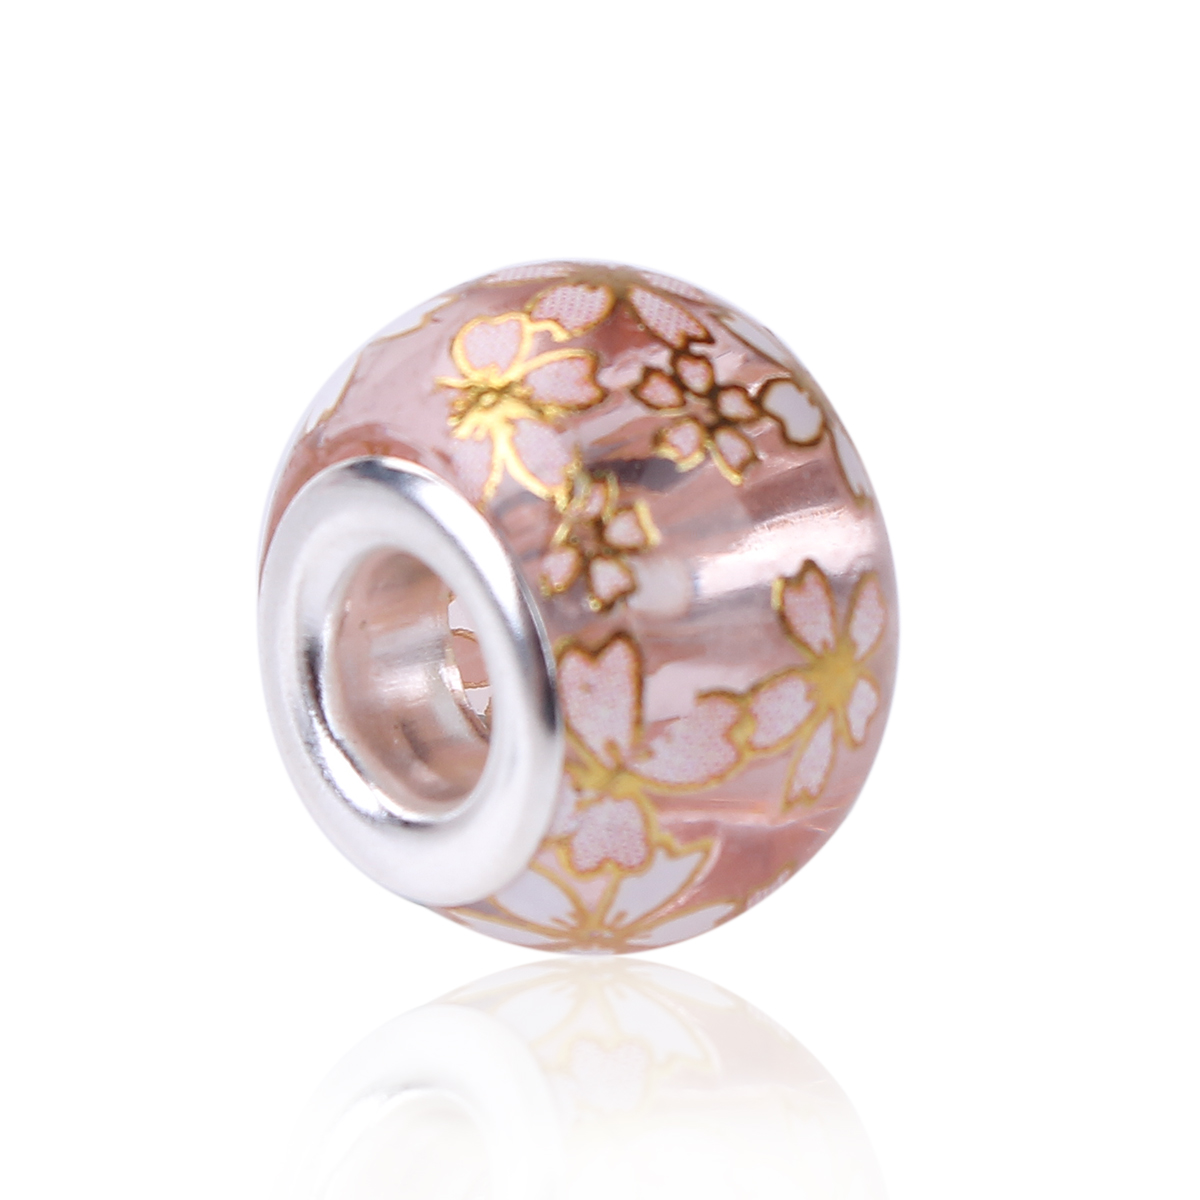 Picture of Glass Japan Painting Vintage Japanese Tensha European Style Large Hole Charm Beads Round Silver Plated Sakura Flower Light Pink Transparent About 14mm( 4/8") Dia, Hole: Approx 4.7mm, 5 PCs